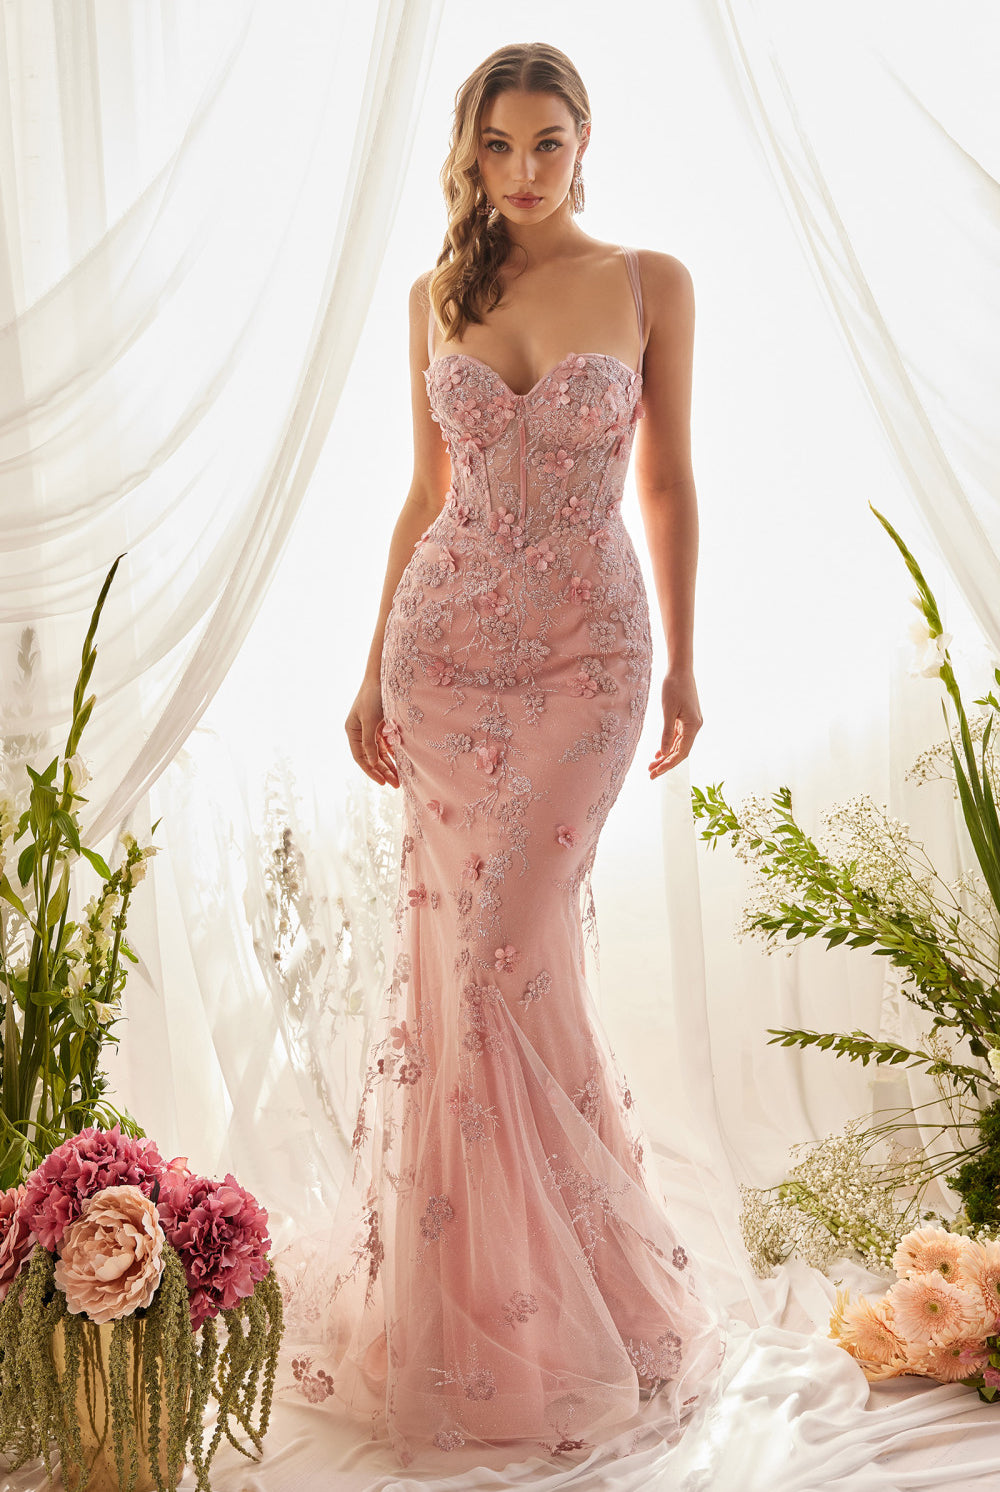 Embellished Daisy Prom Gown with Sweetheart Backless Bodice-smcdress